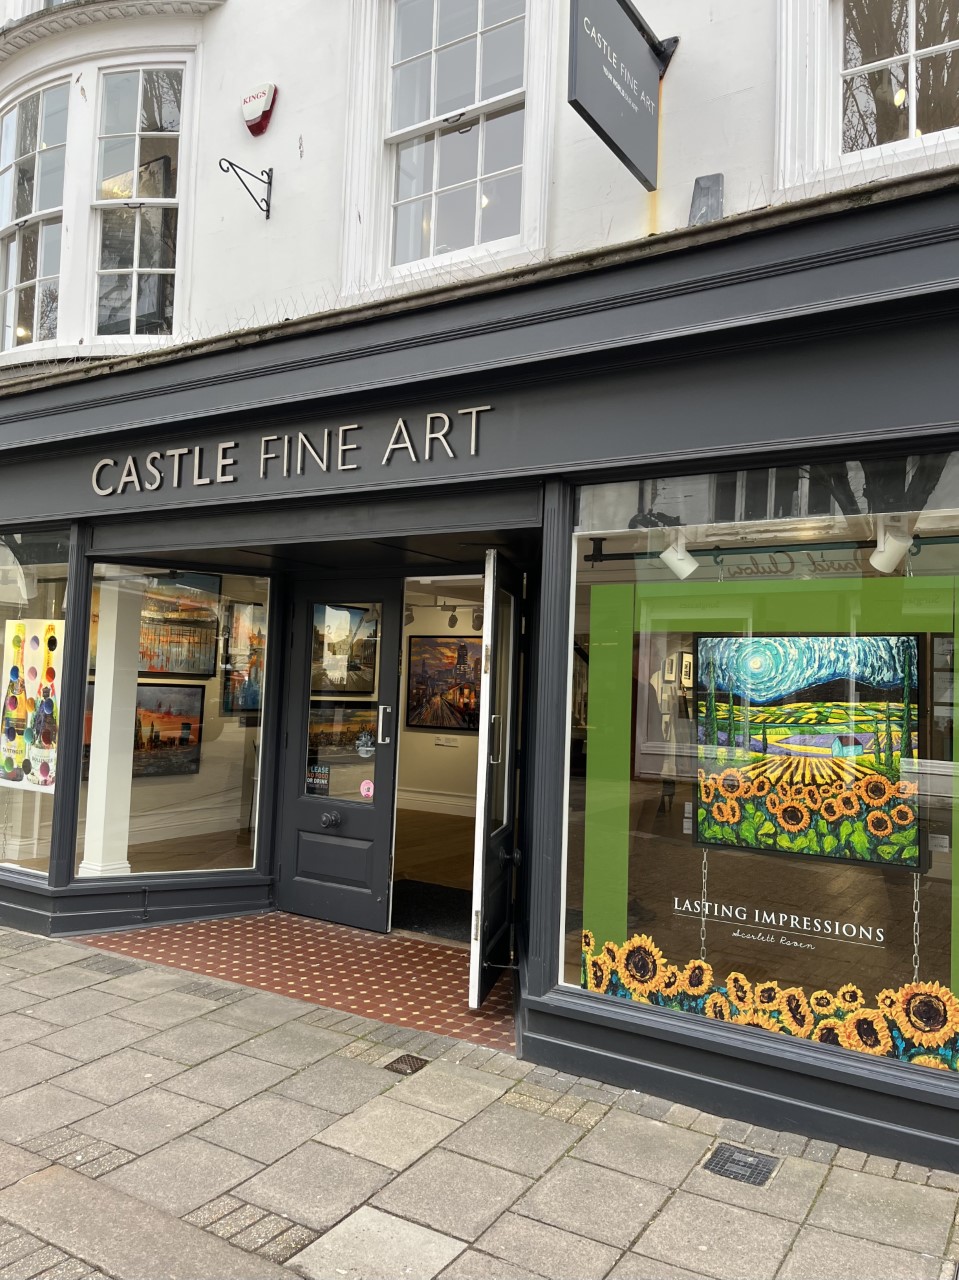 Image shows store front of Castle Fine Art in Brighton, East Street